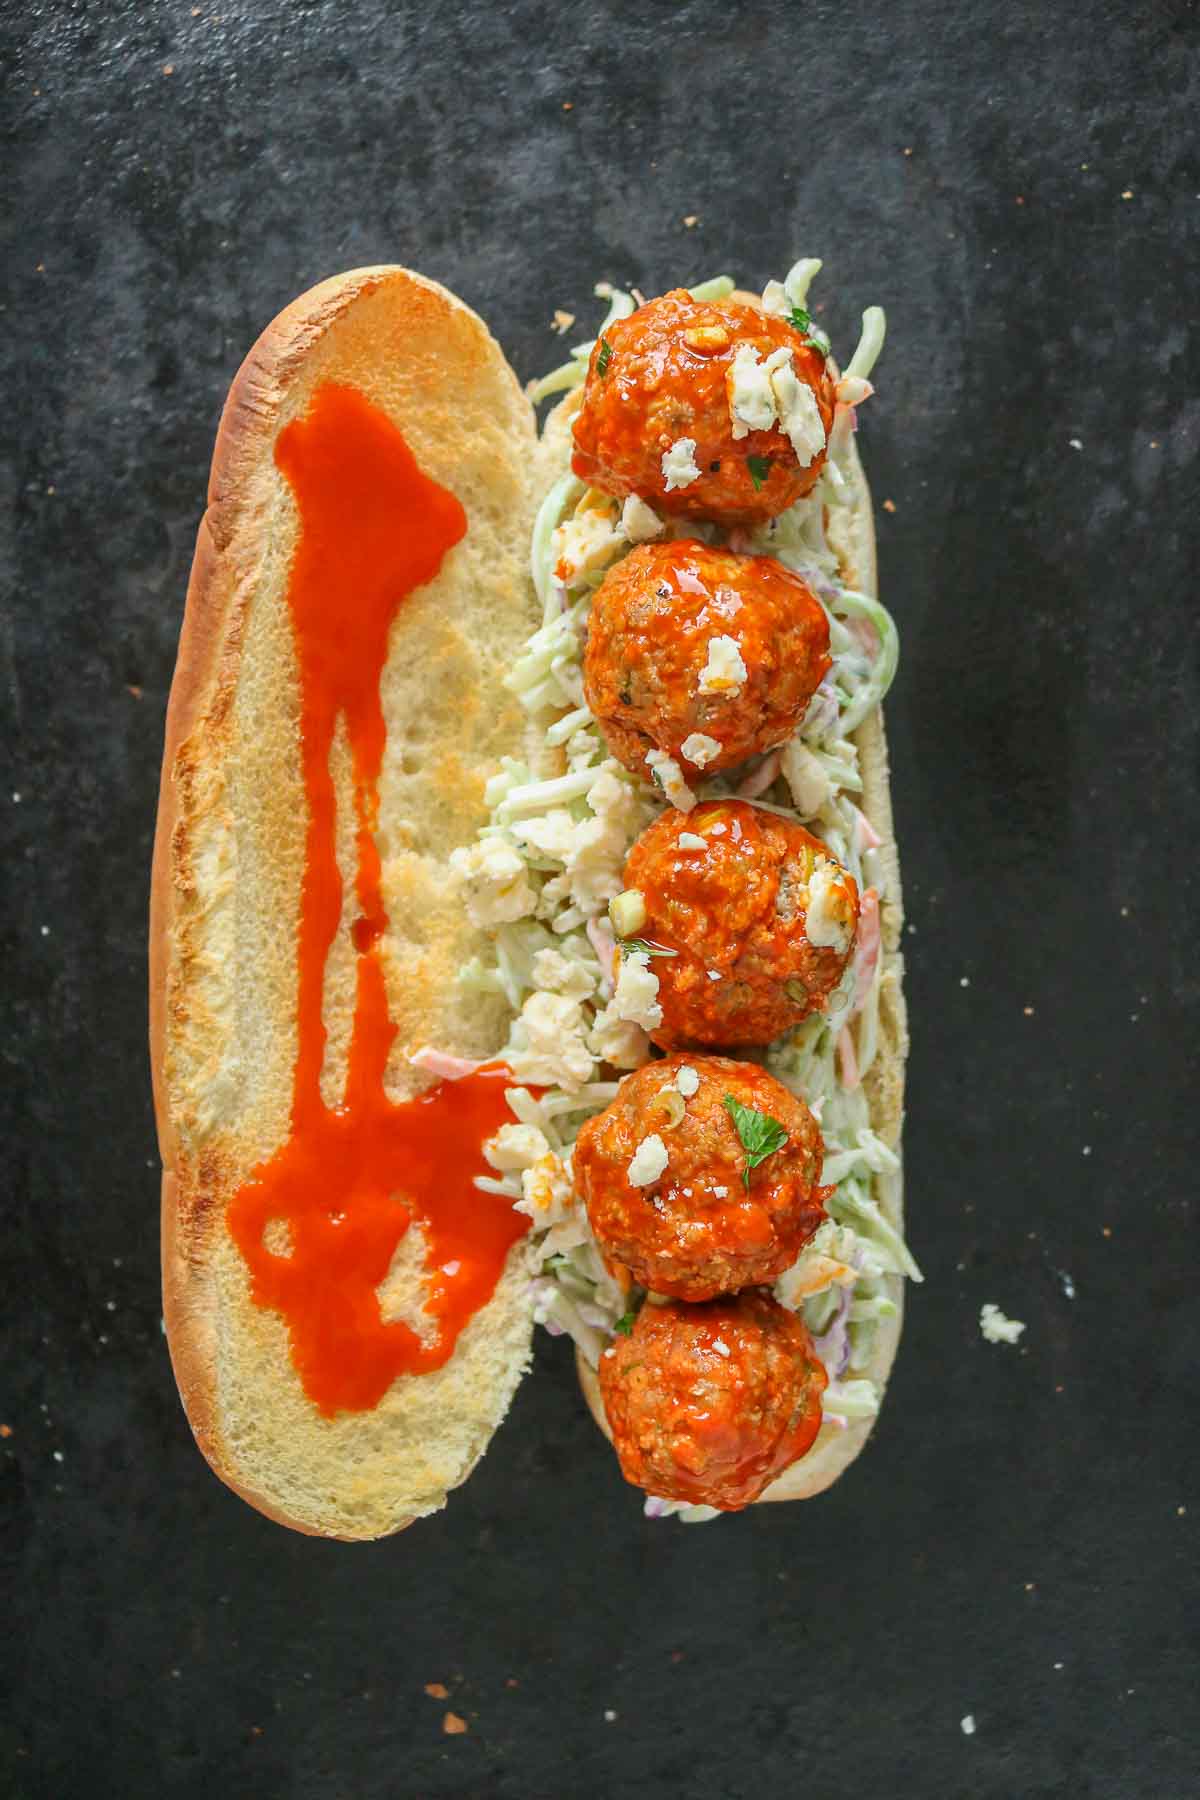 Spicy sub sandwich with buffalo turkey meatballs before the top bun is placed over the bottom bun.